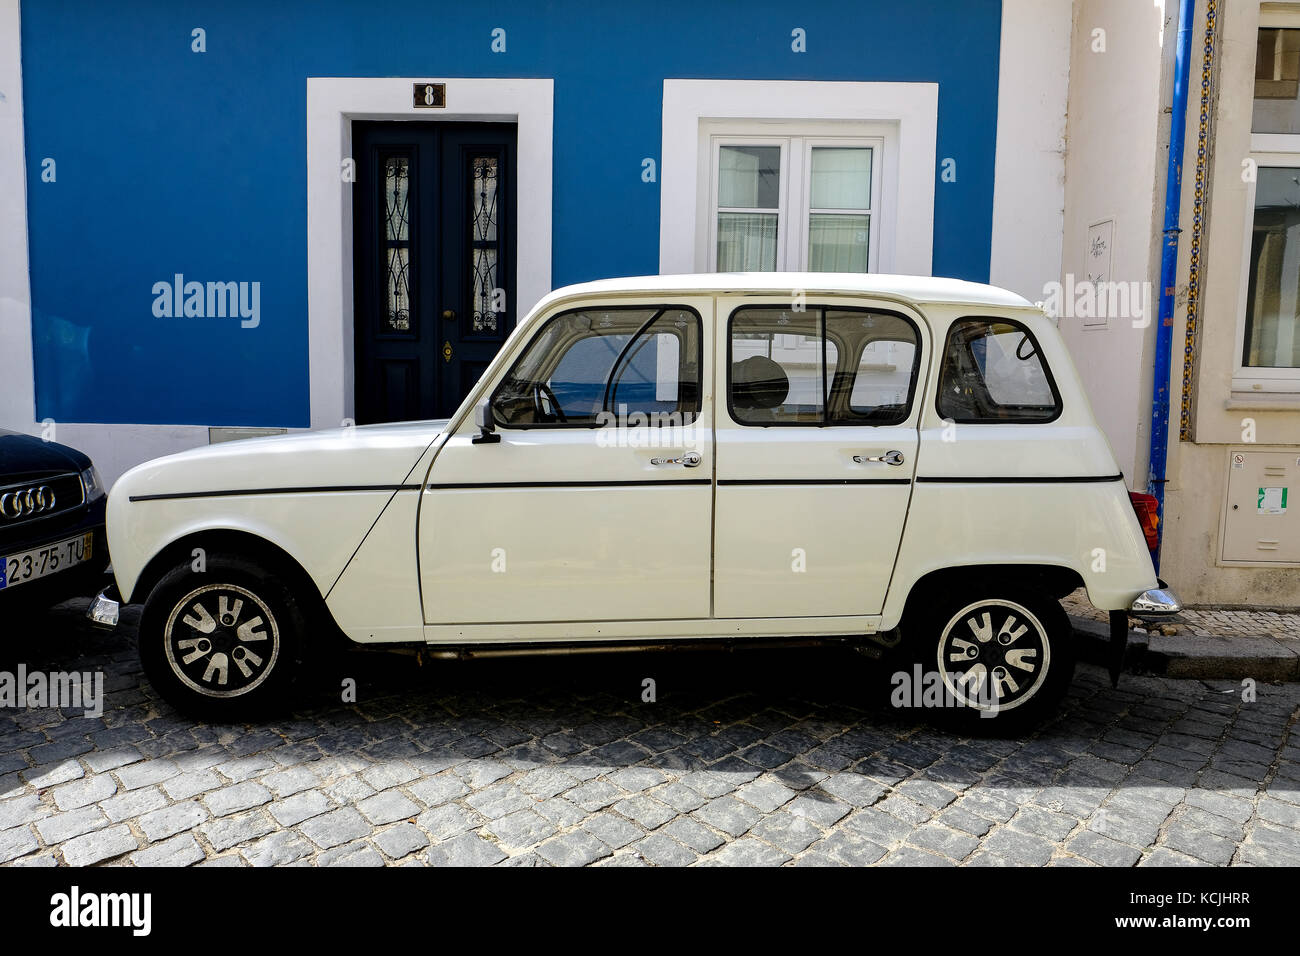 Vintage car parked in the city center of aveiro, Portugal Stock Photo